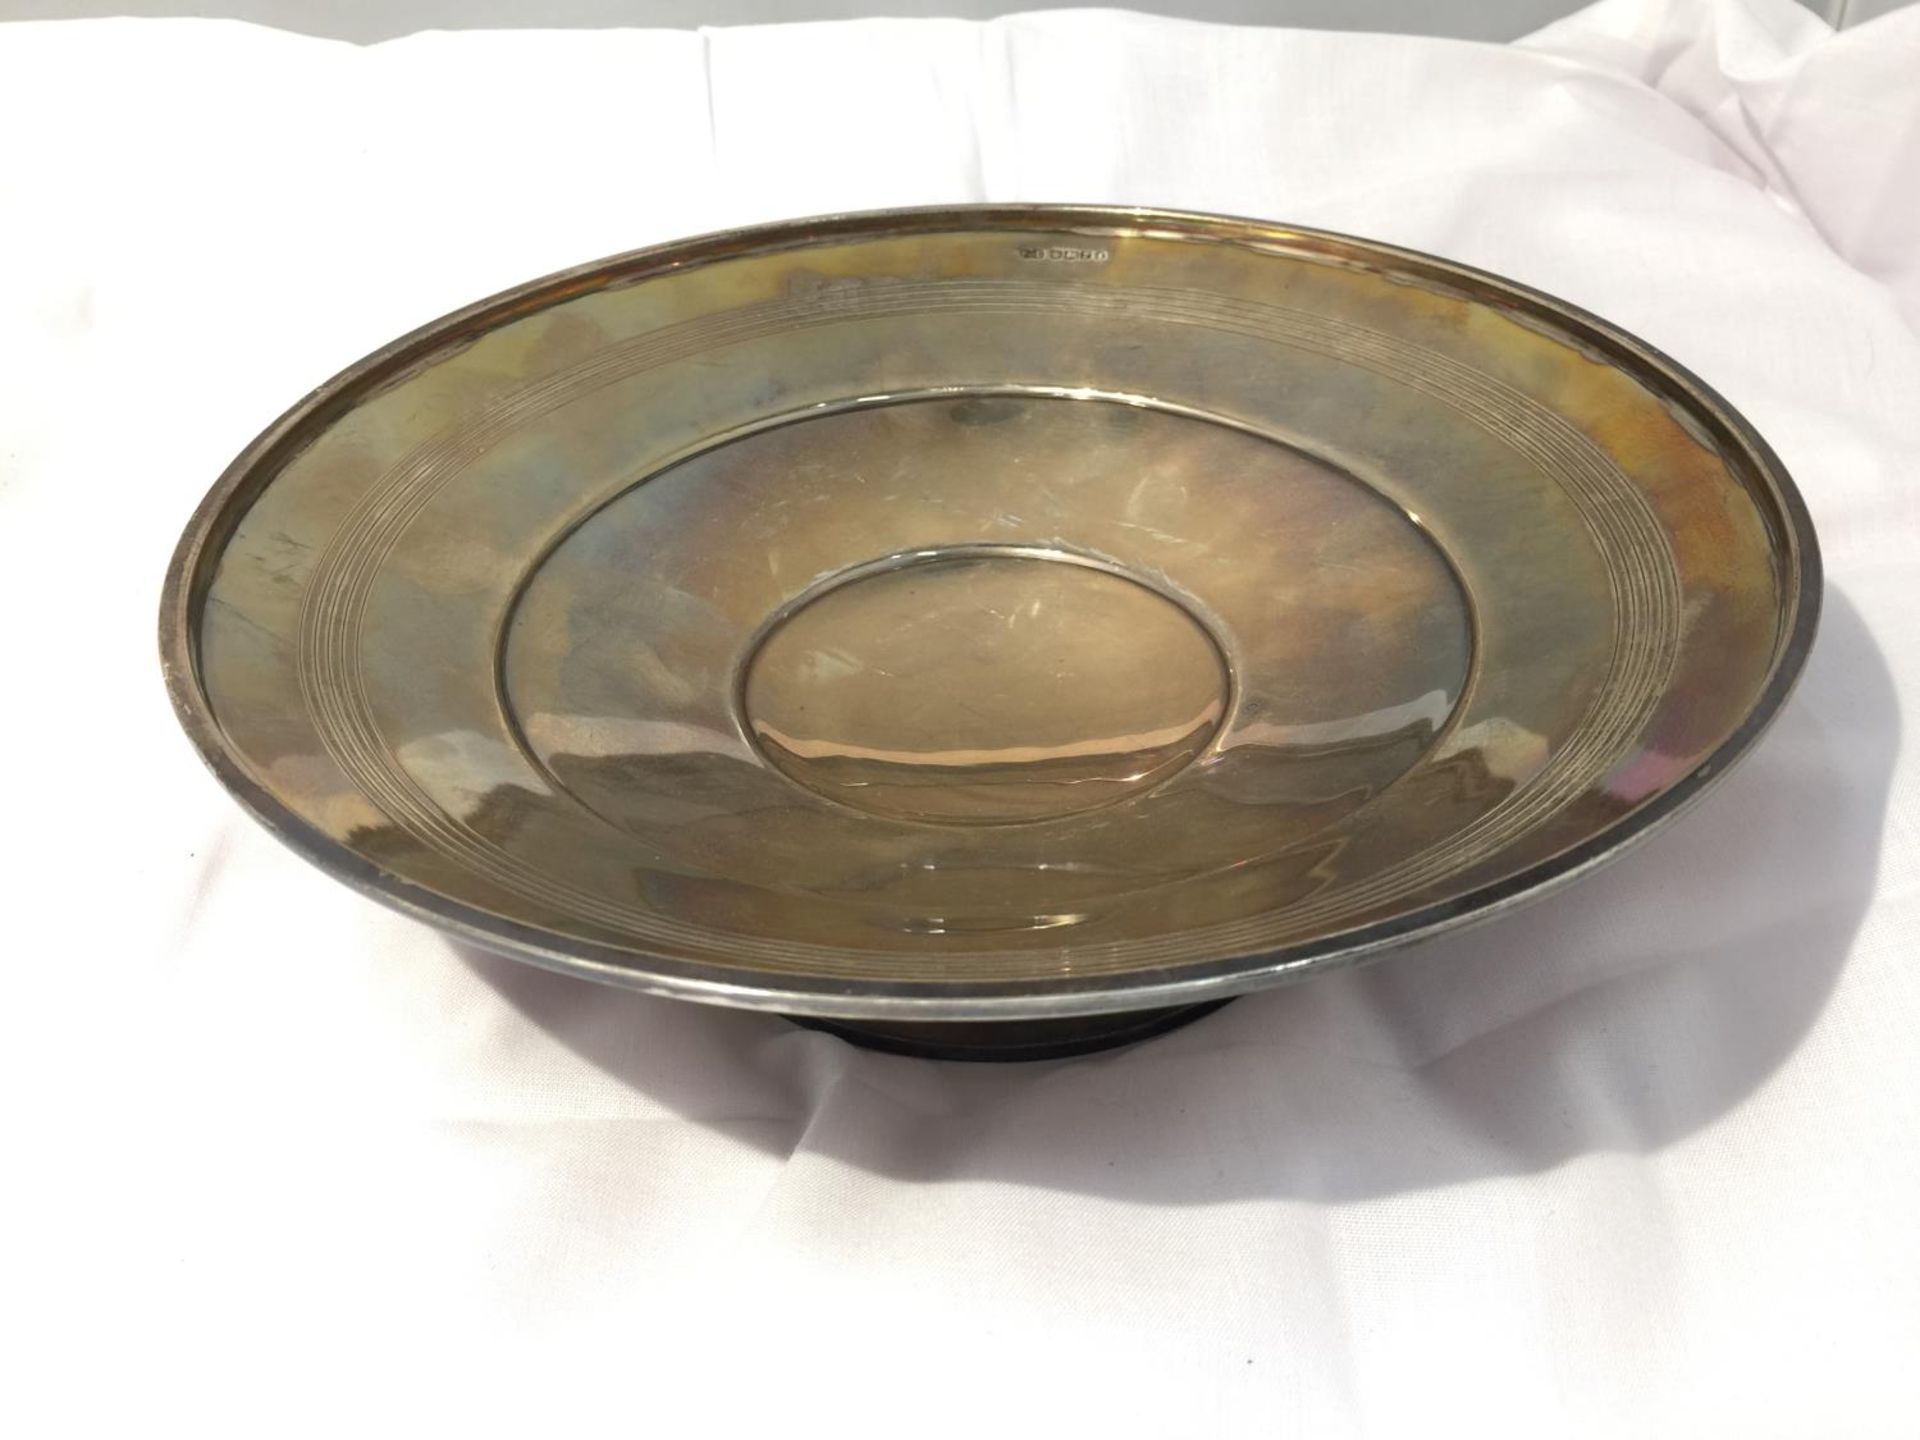 A HALLMARKED SHEFFIELD PEDESTAL DISH ENGRAVED AUGUST 10TH 1935 GROSS WEIGHT 377 GRAMS - Image 4 of 4